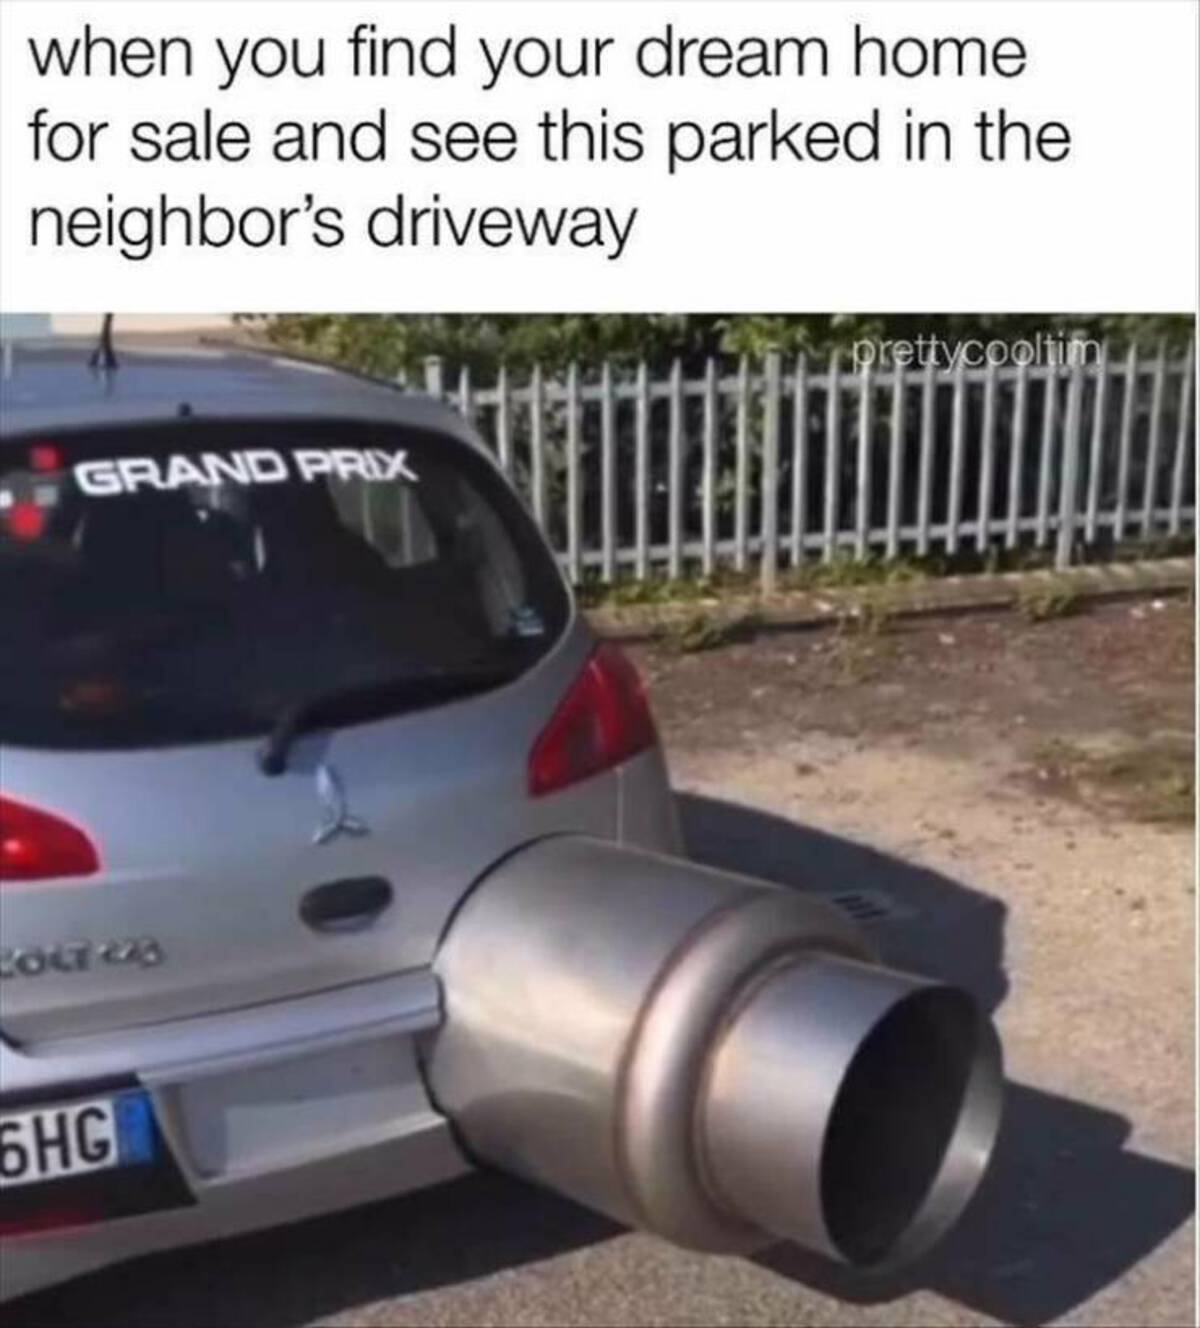 harry potter memes horcruxes - when you find your dream home for sale and see this parked in the neighbor's driveway Grand Prix Coct 228 prettycooltim